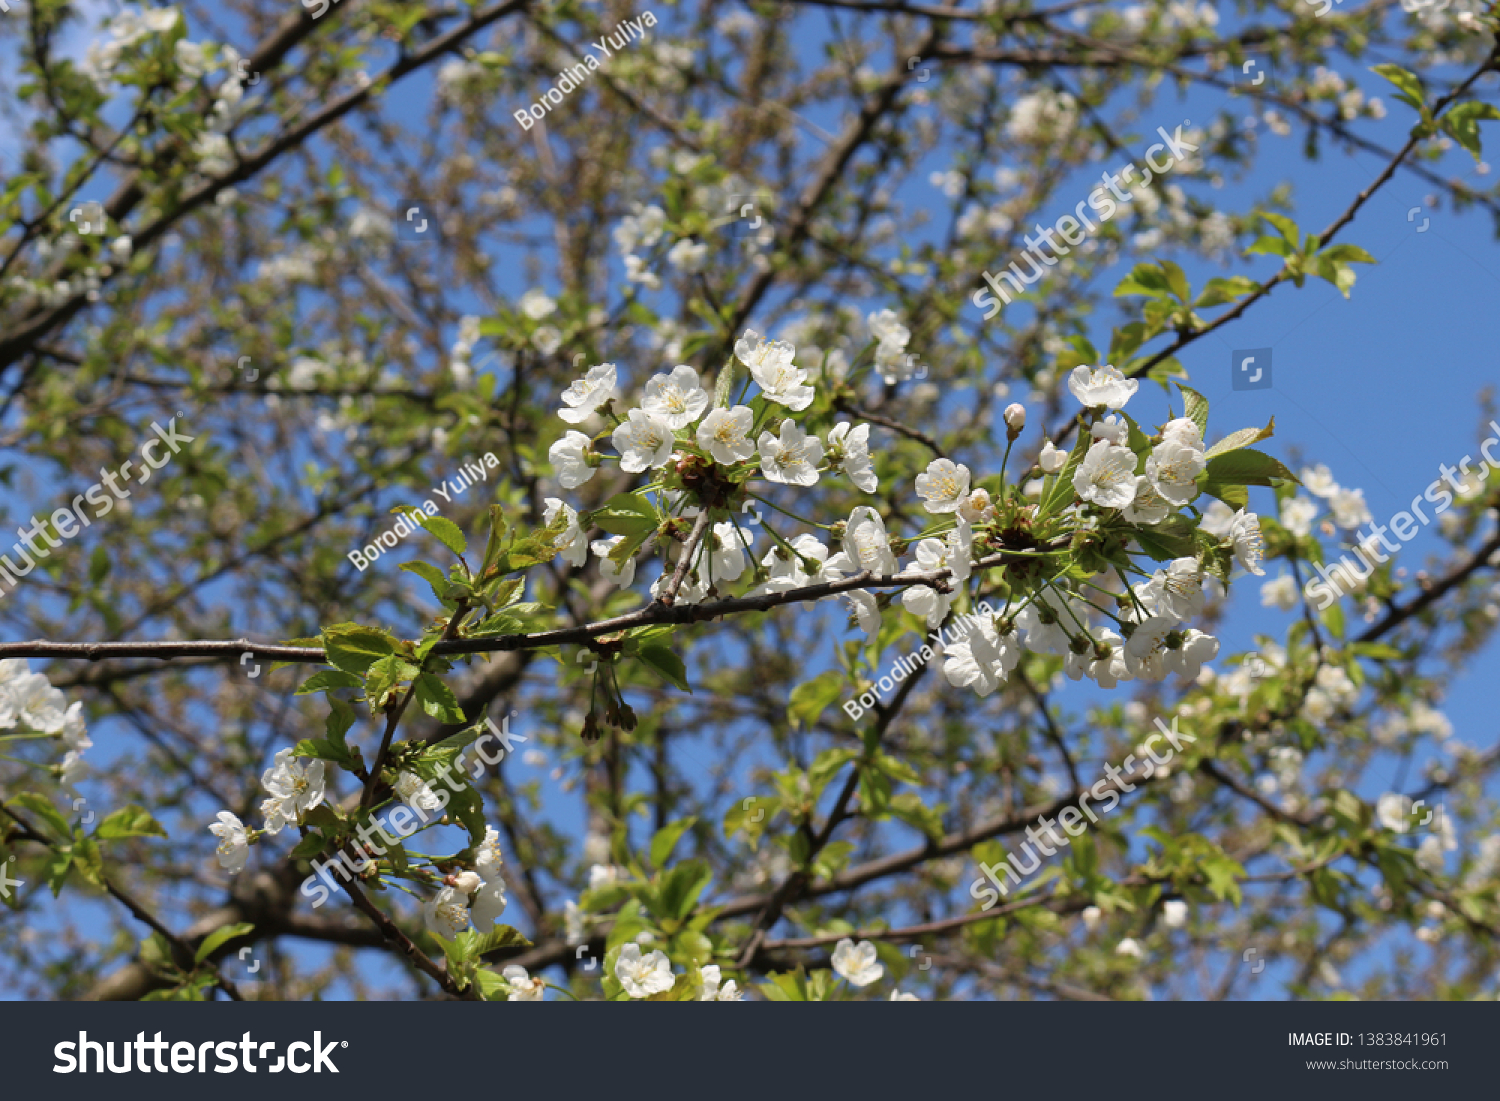 
The fruit tree blooms with delicate fragrant white flowers on a sunny spring day #1383841961